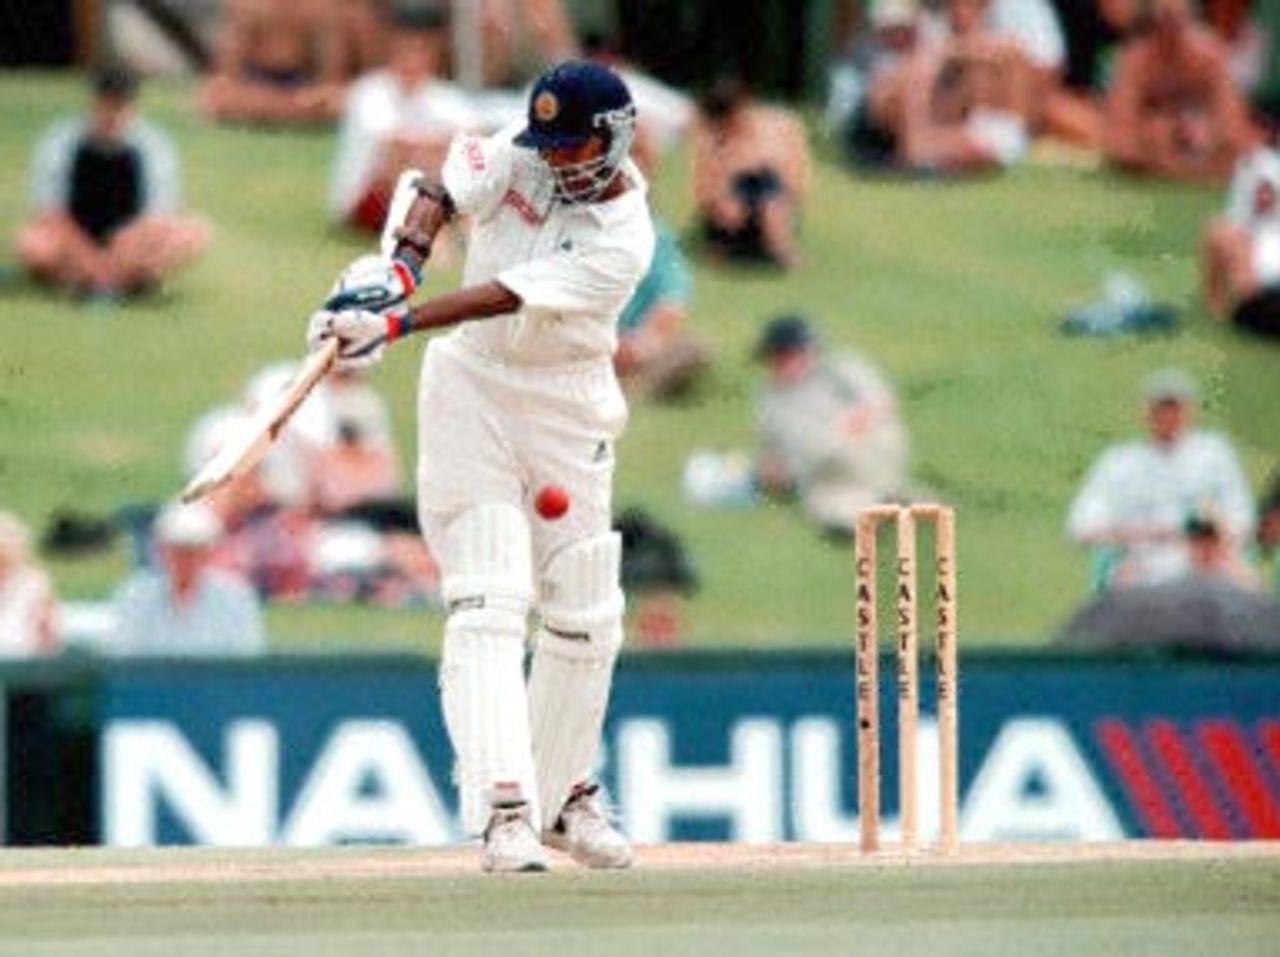 Sri Lankan batsman Sangakara is seen on his way to scoring 98 against the South Africans during the third and final day of the third and final five day international played at Centurion Park 22 January 2001. The South Africans won the match and also the series.